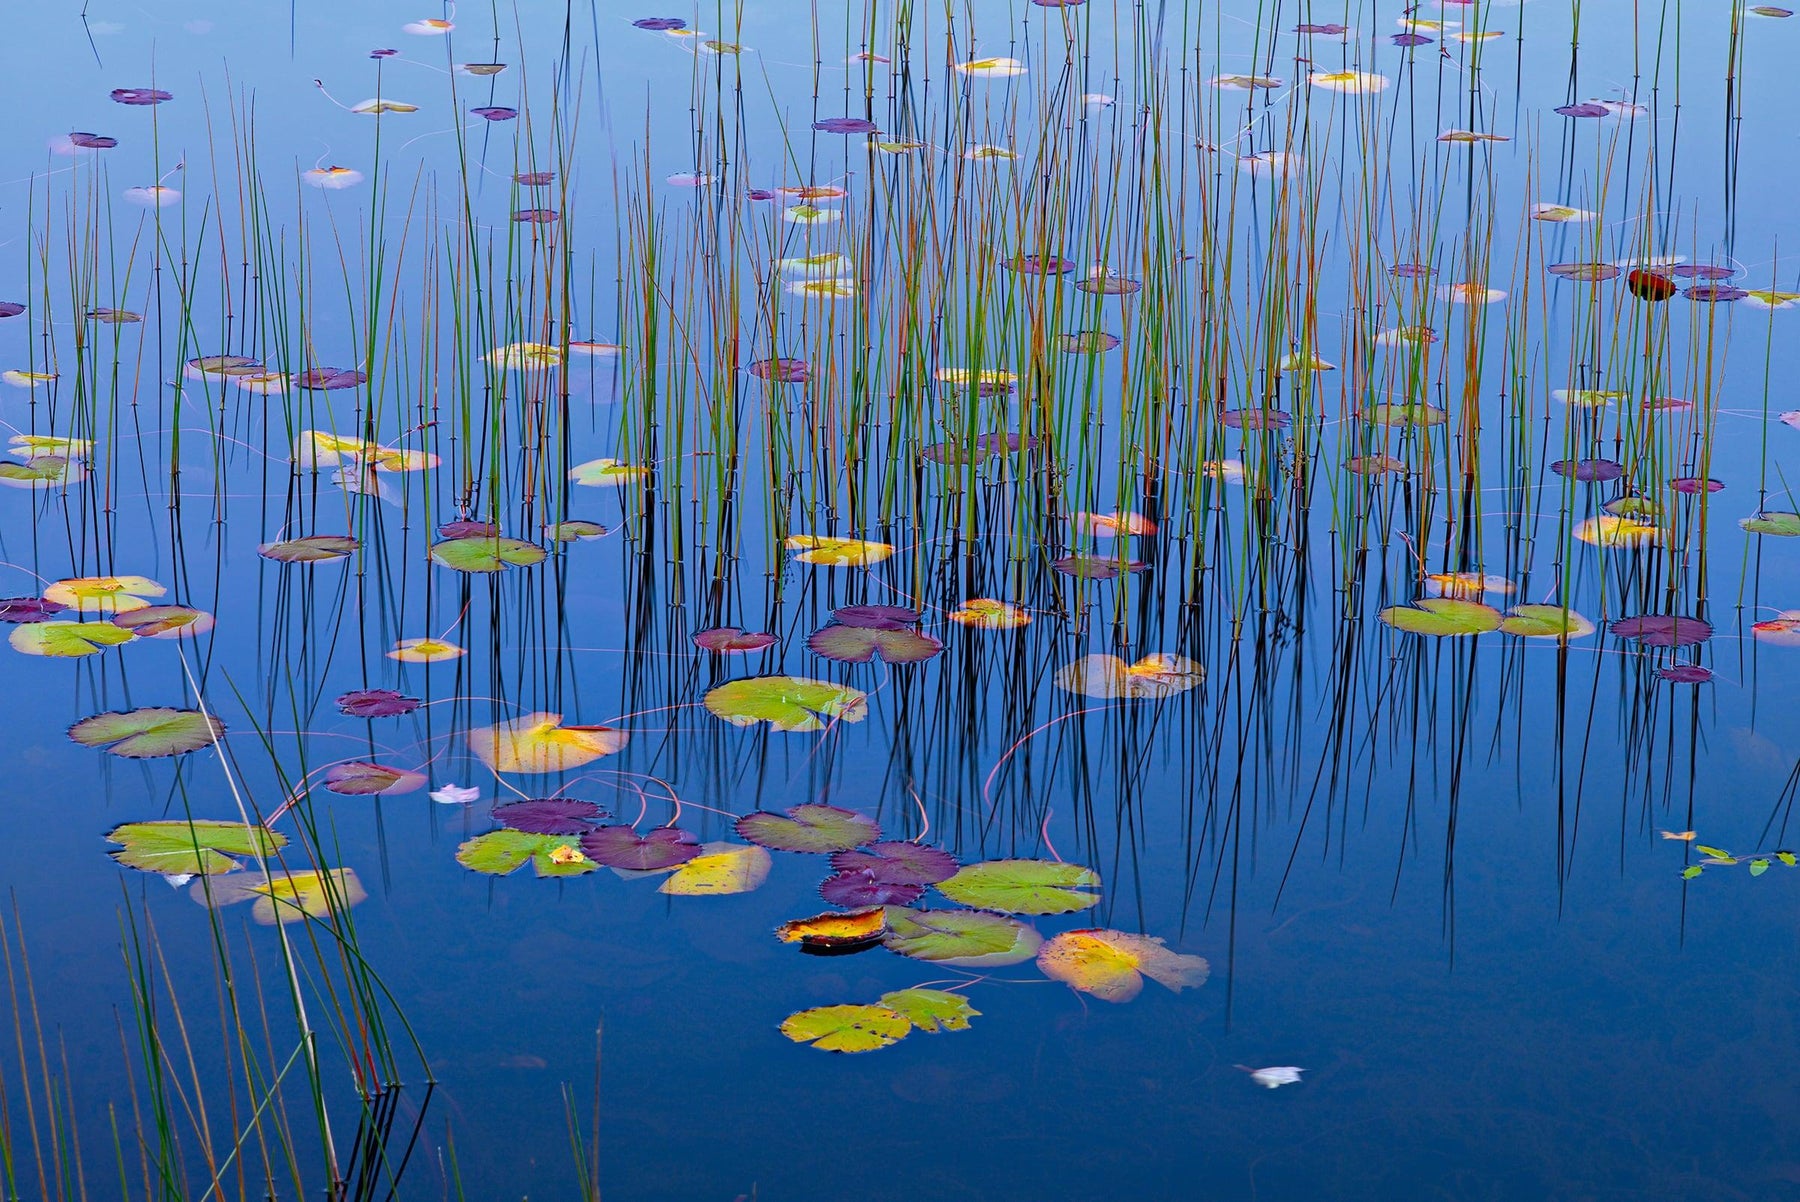 Colorful lily pads and grass reed in a pond at Acadia National Park Maine